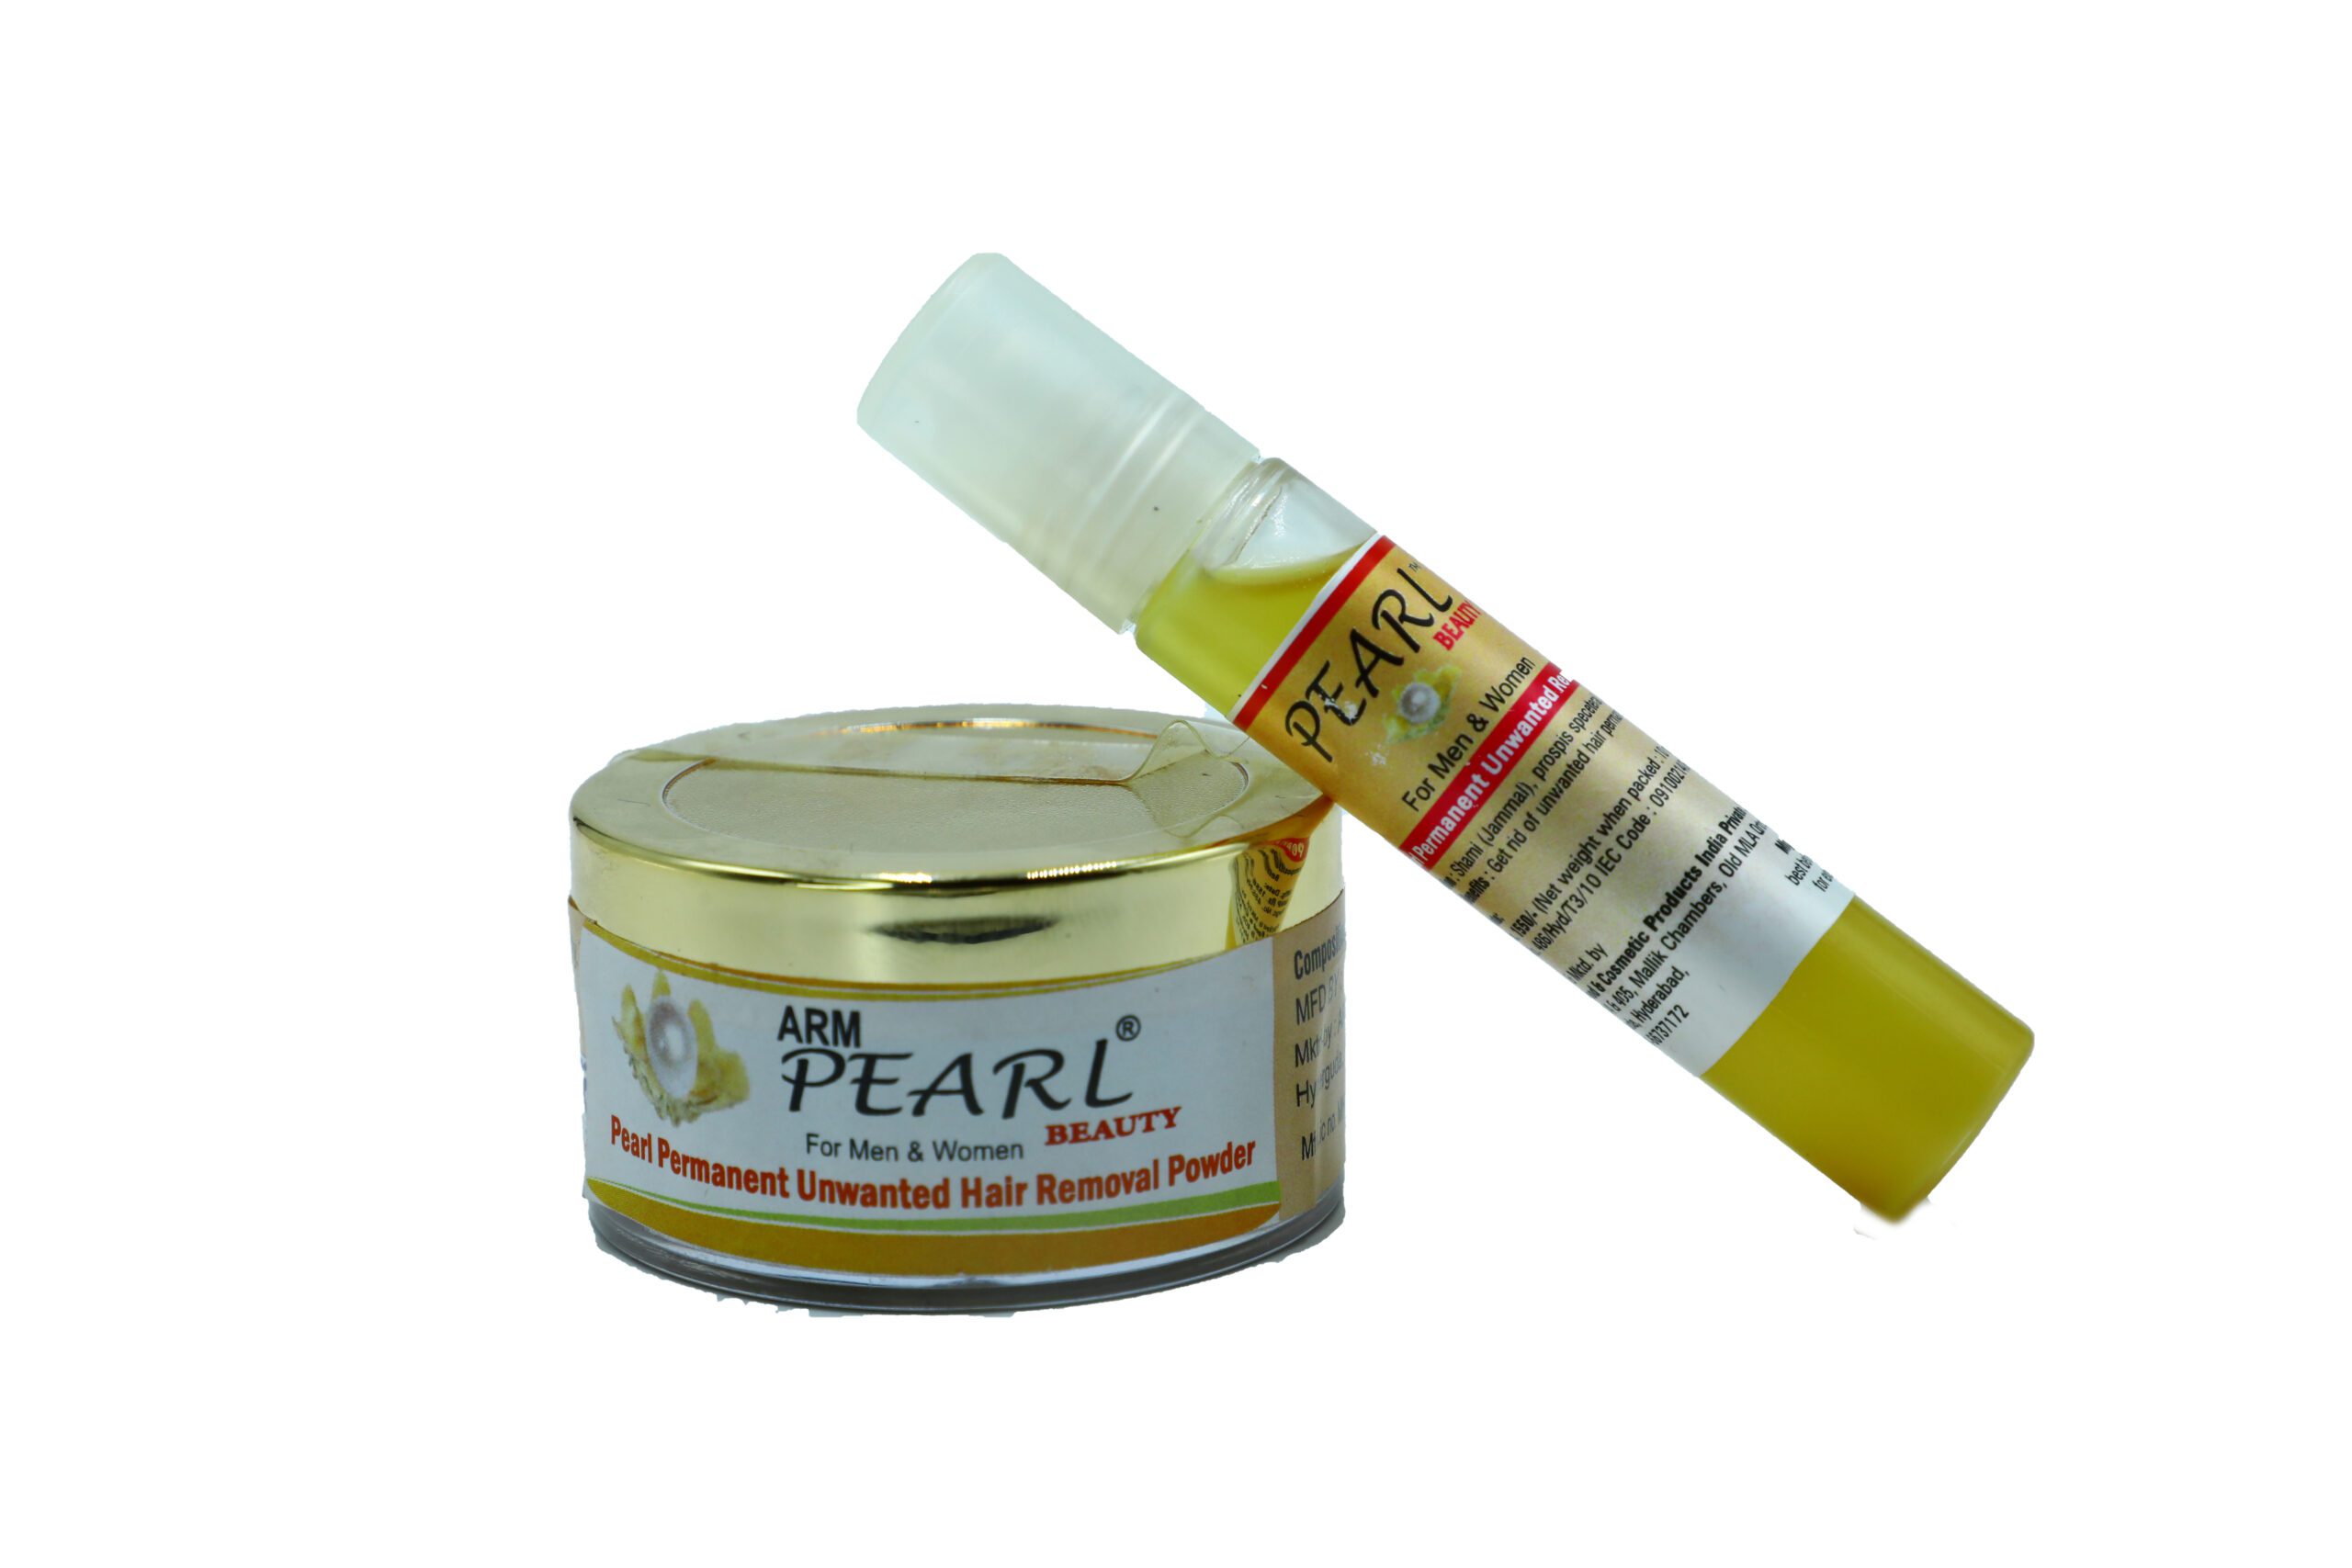 Unwanted | Permanent | Hair Removal Oil With Powder - ARM Pearl Beauty